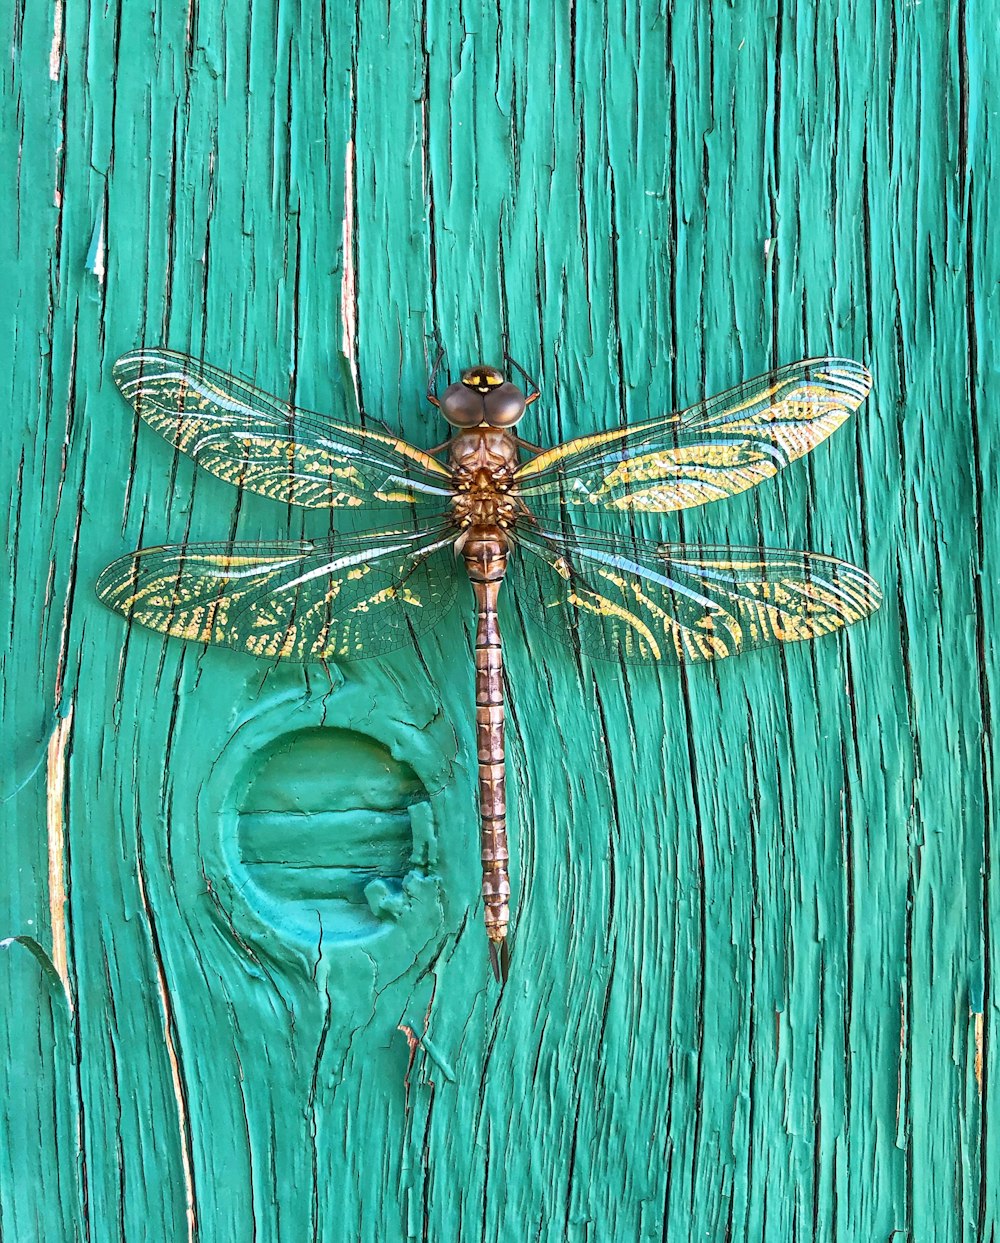 a dragonfly sitting on top of a wooden door